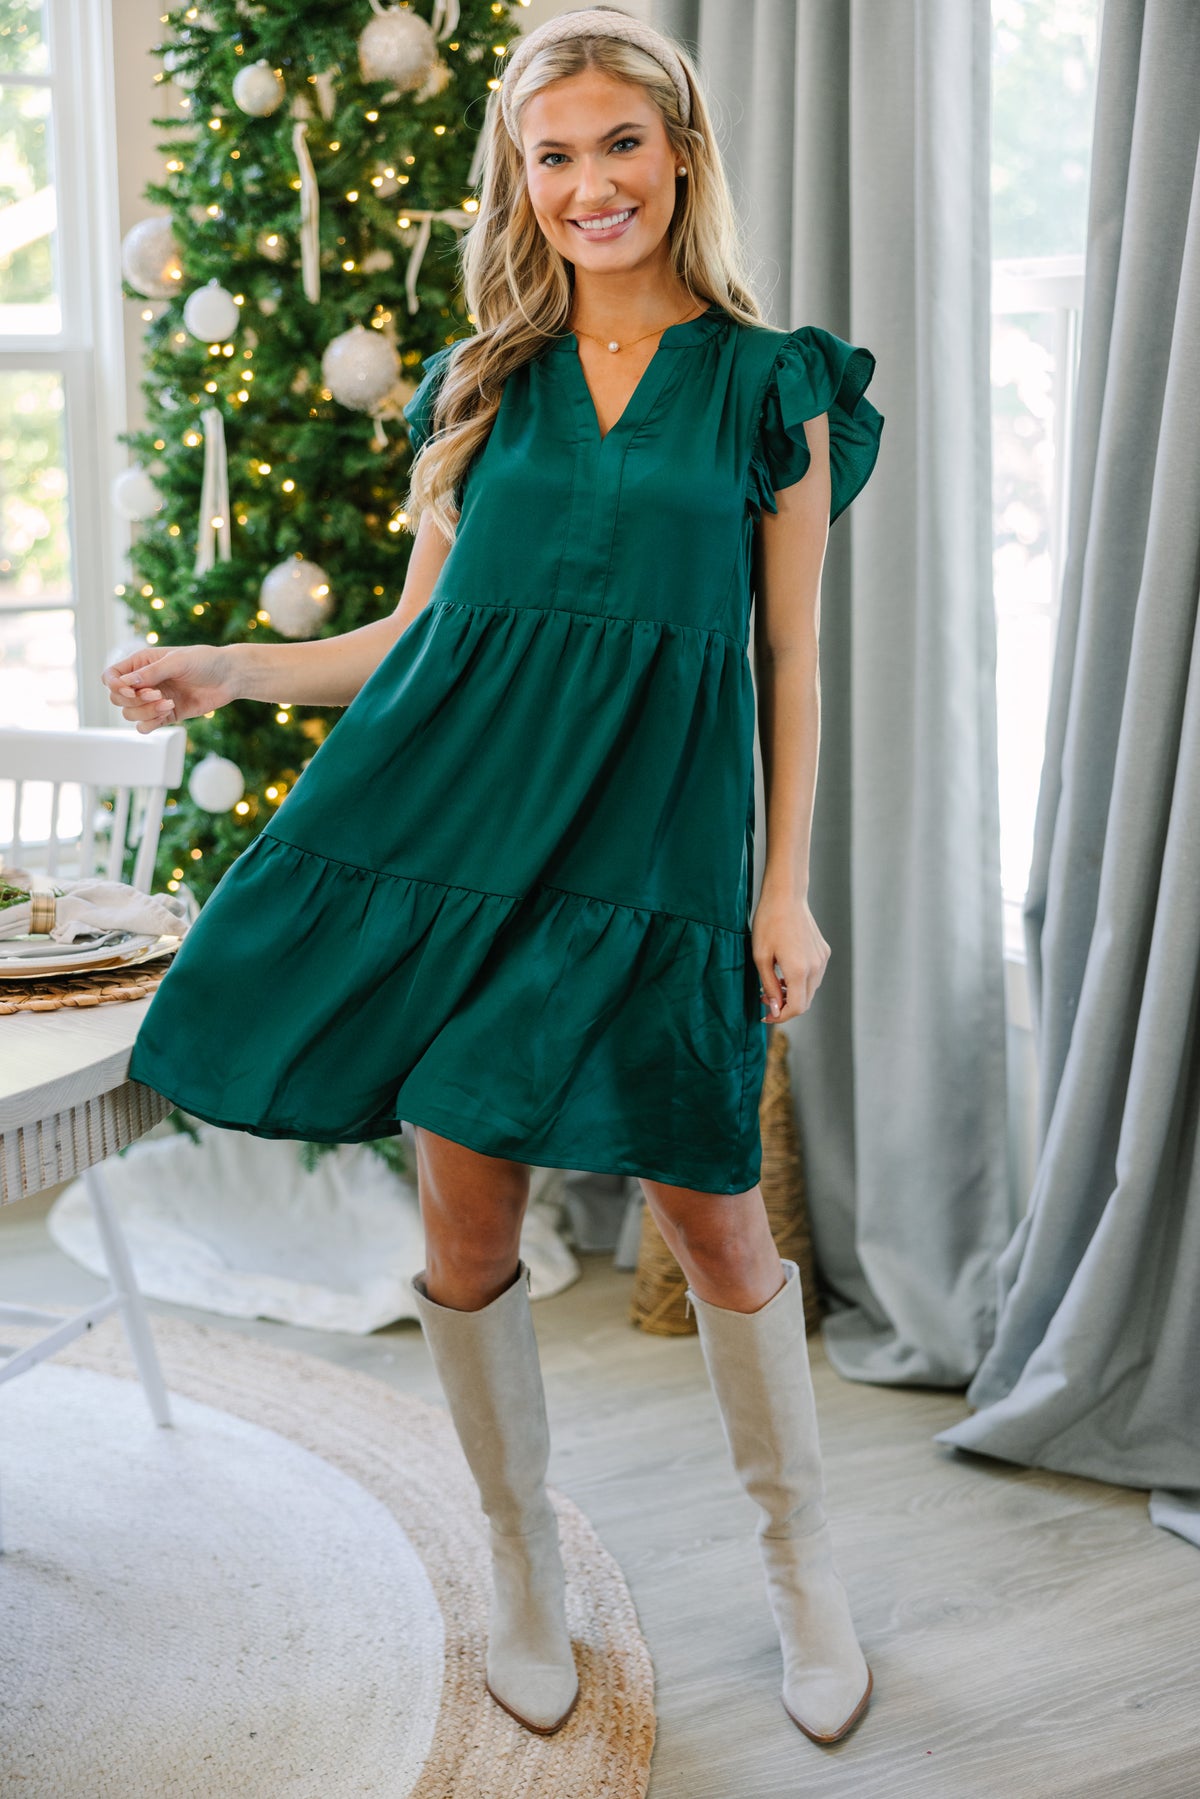 At This Time Emerald Green Satin Dress – Shop the Mint